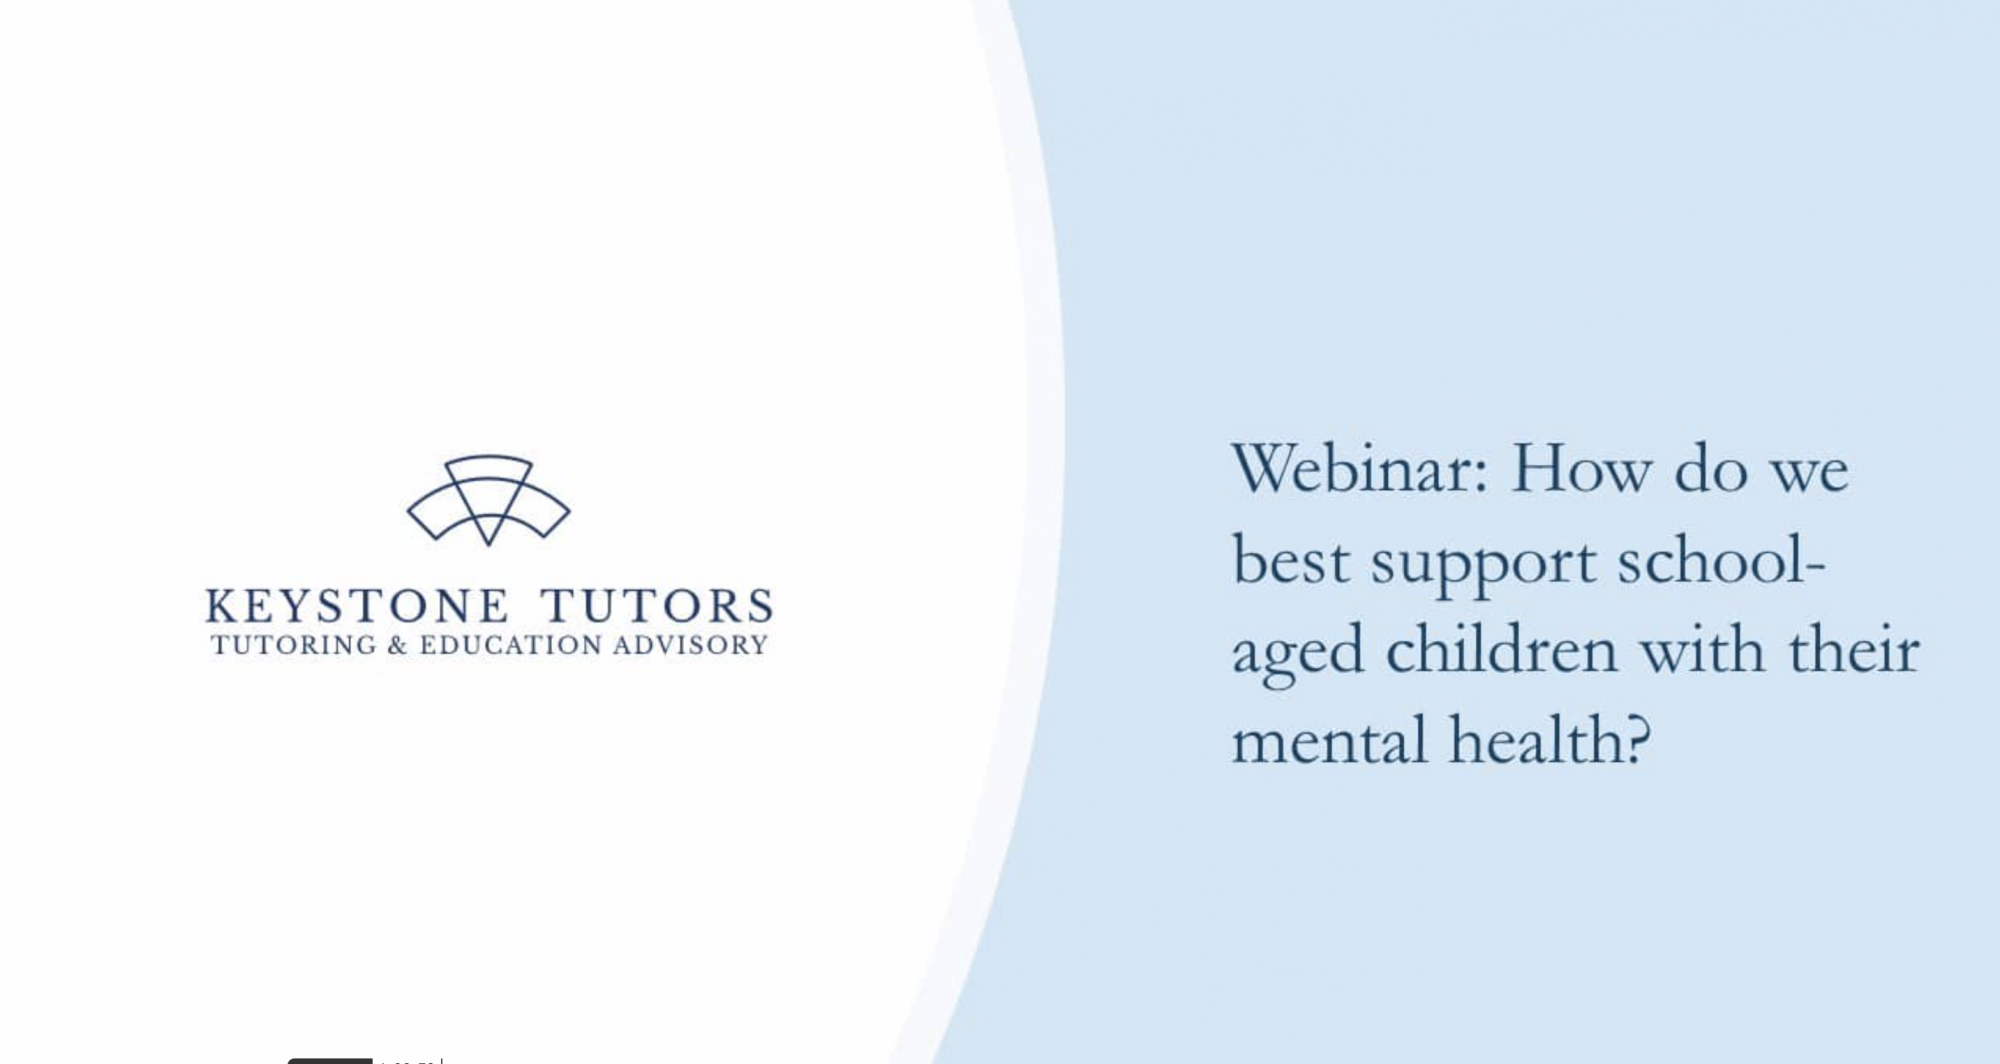 How do we best support school-aged children with their mental health? (Webinar)